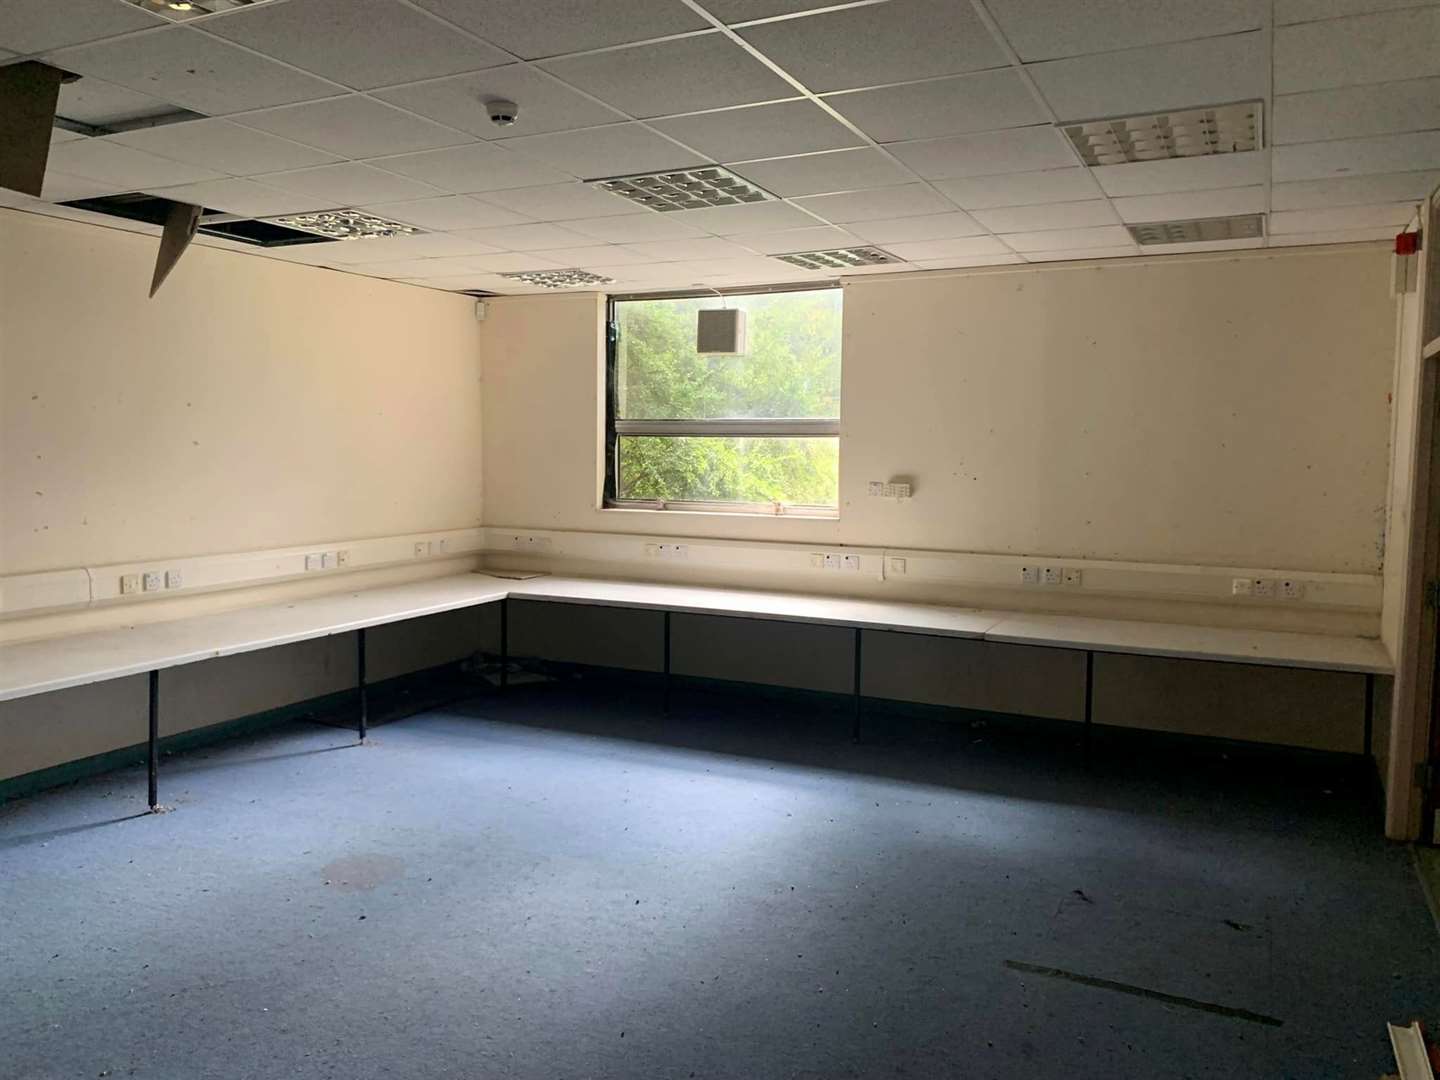 Classrooms at the former school have been stripped